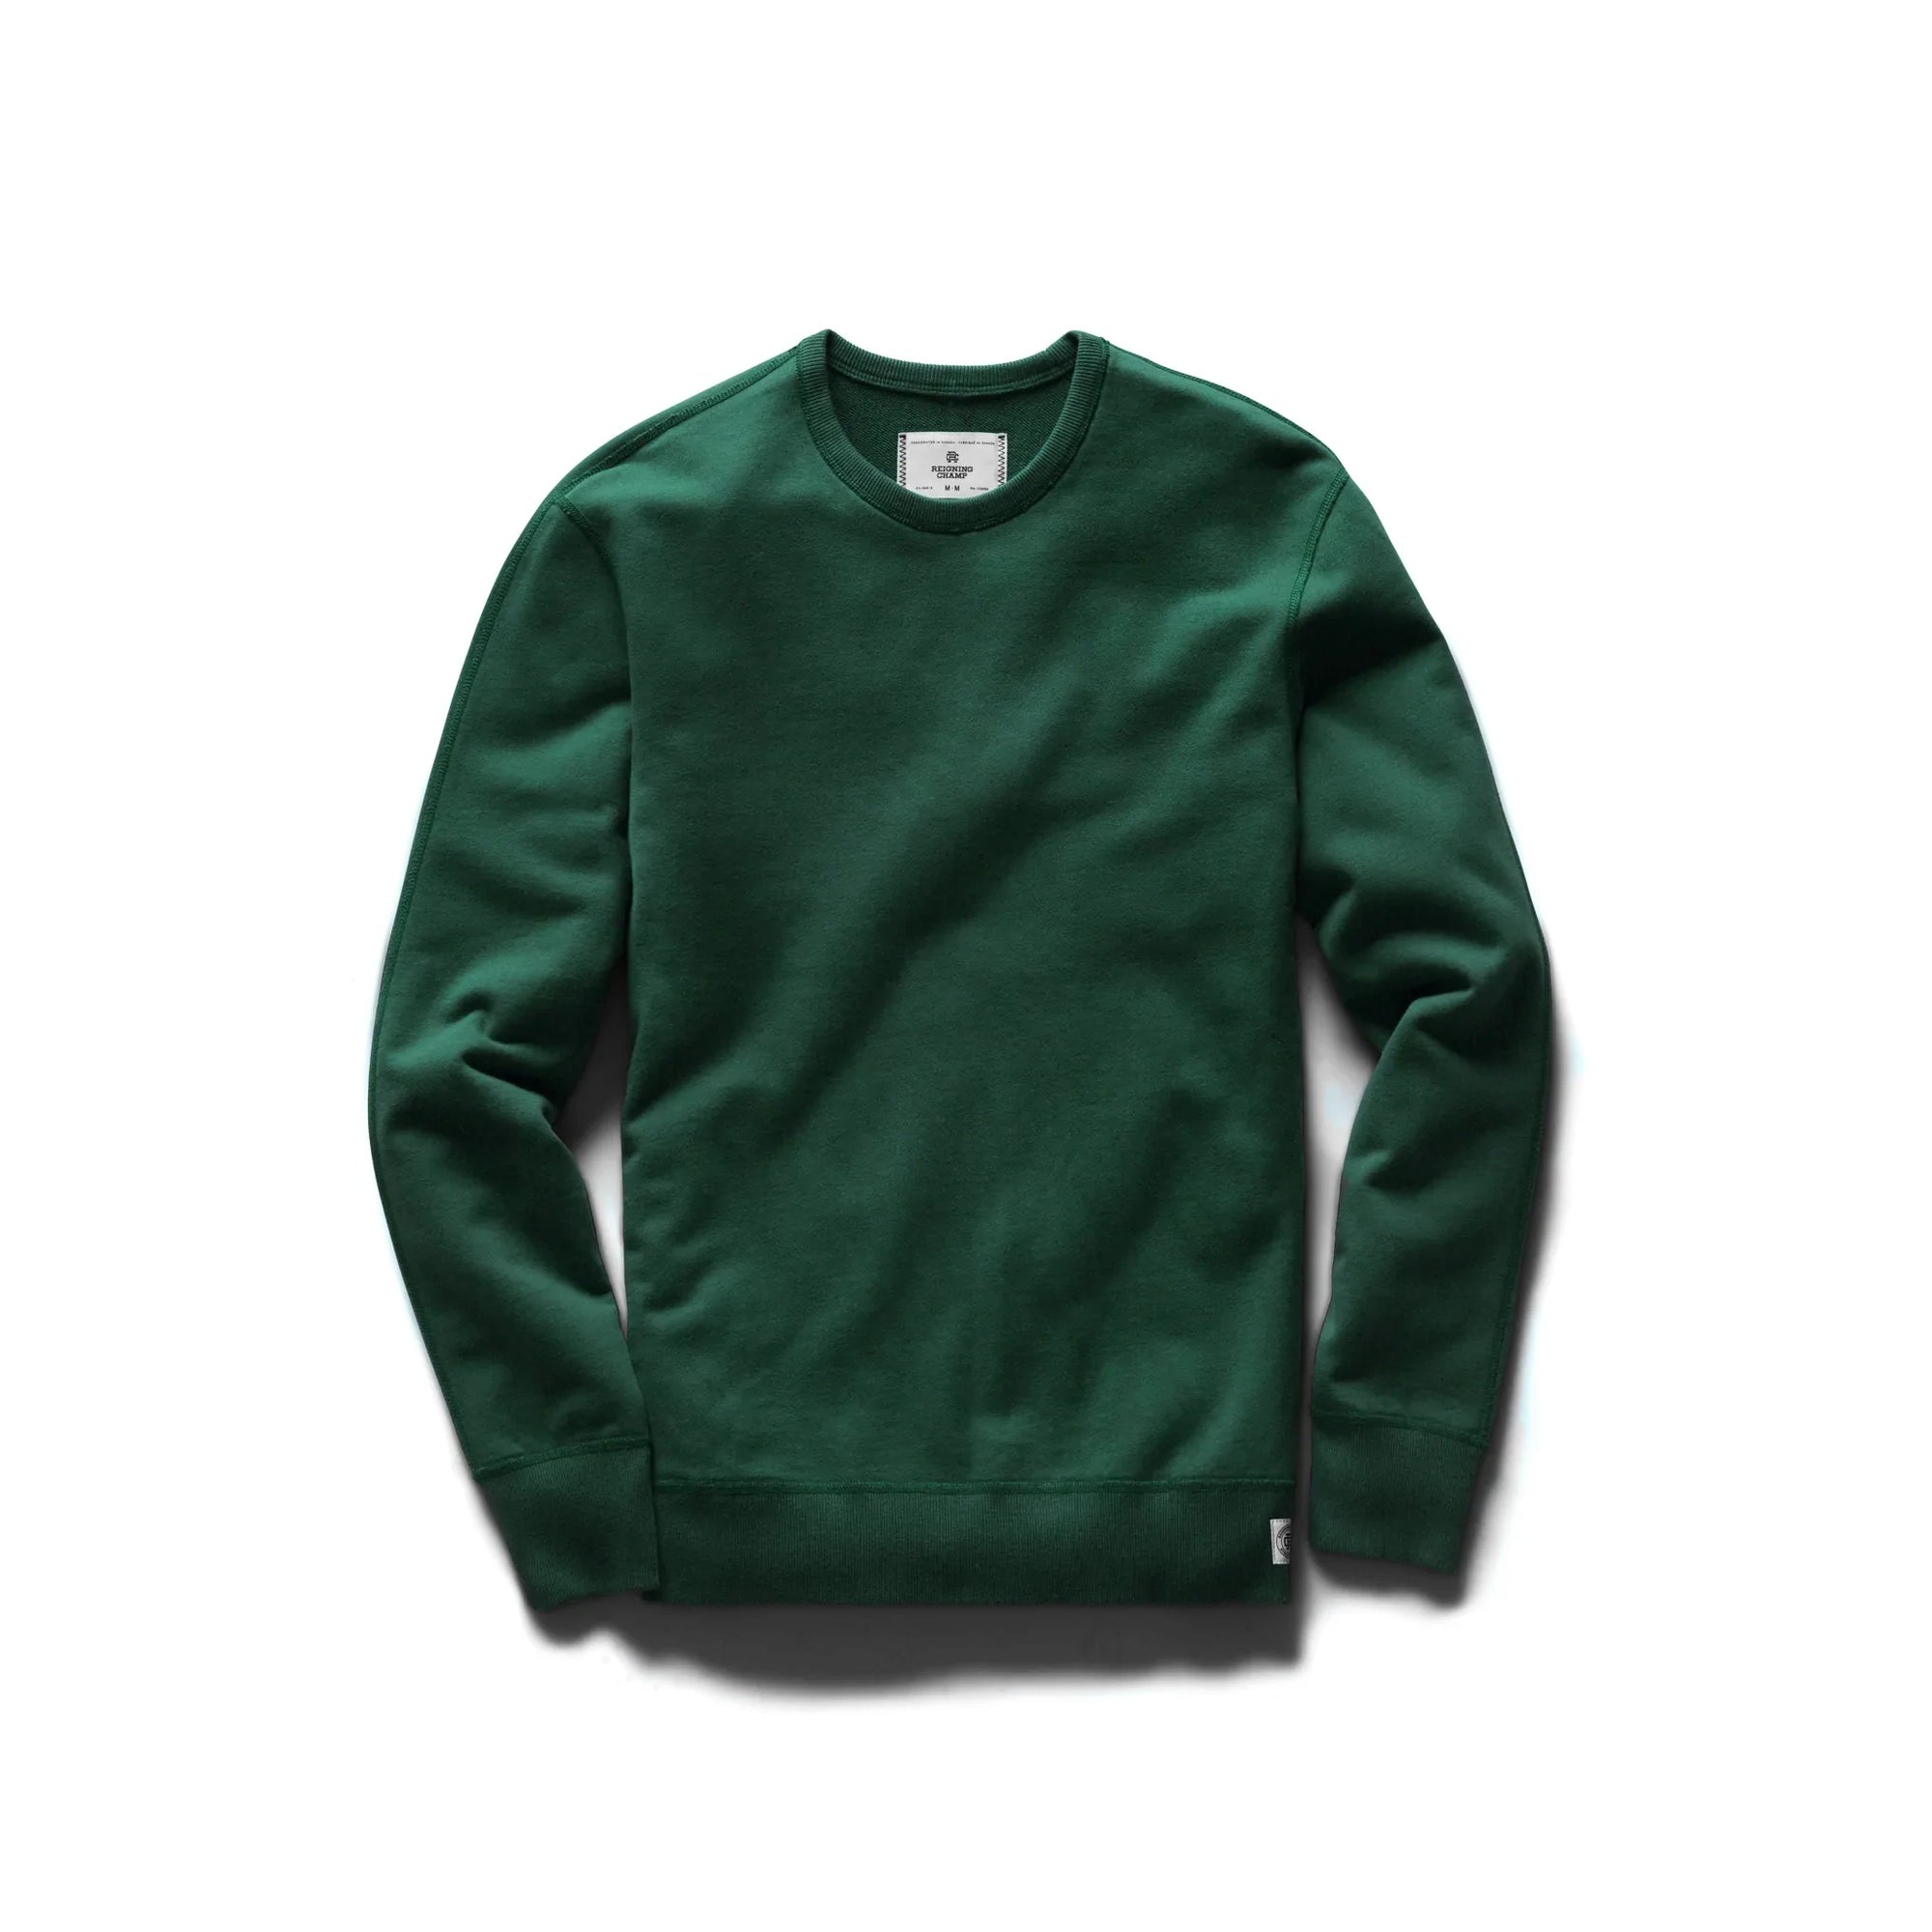 Reigning Champ Mid Weight Terry Crewneck in British Racing Green